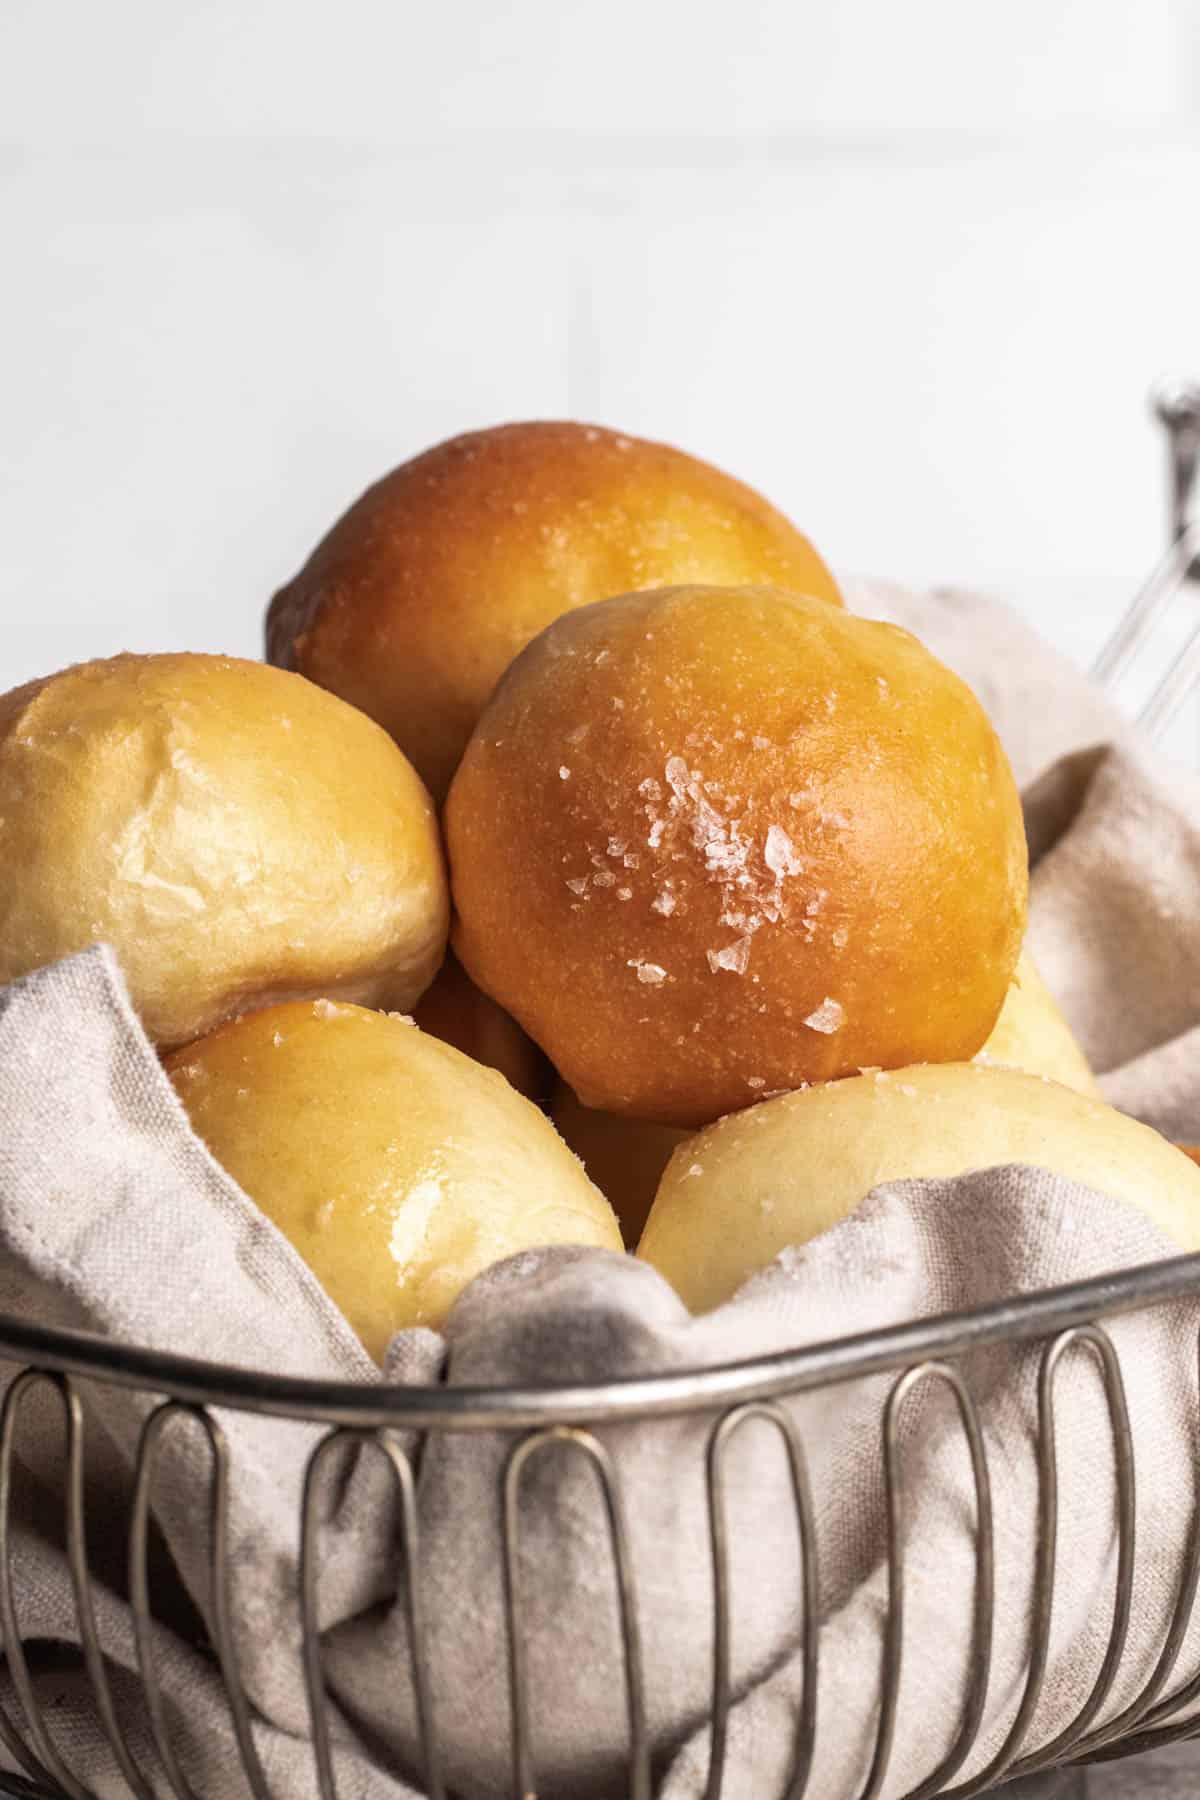 Bread rolls stacked high inside of a wire bread basket lined with a grey napkin.